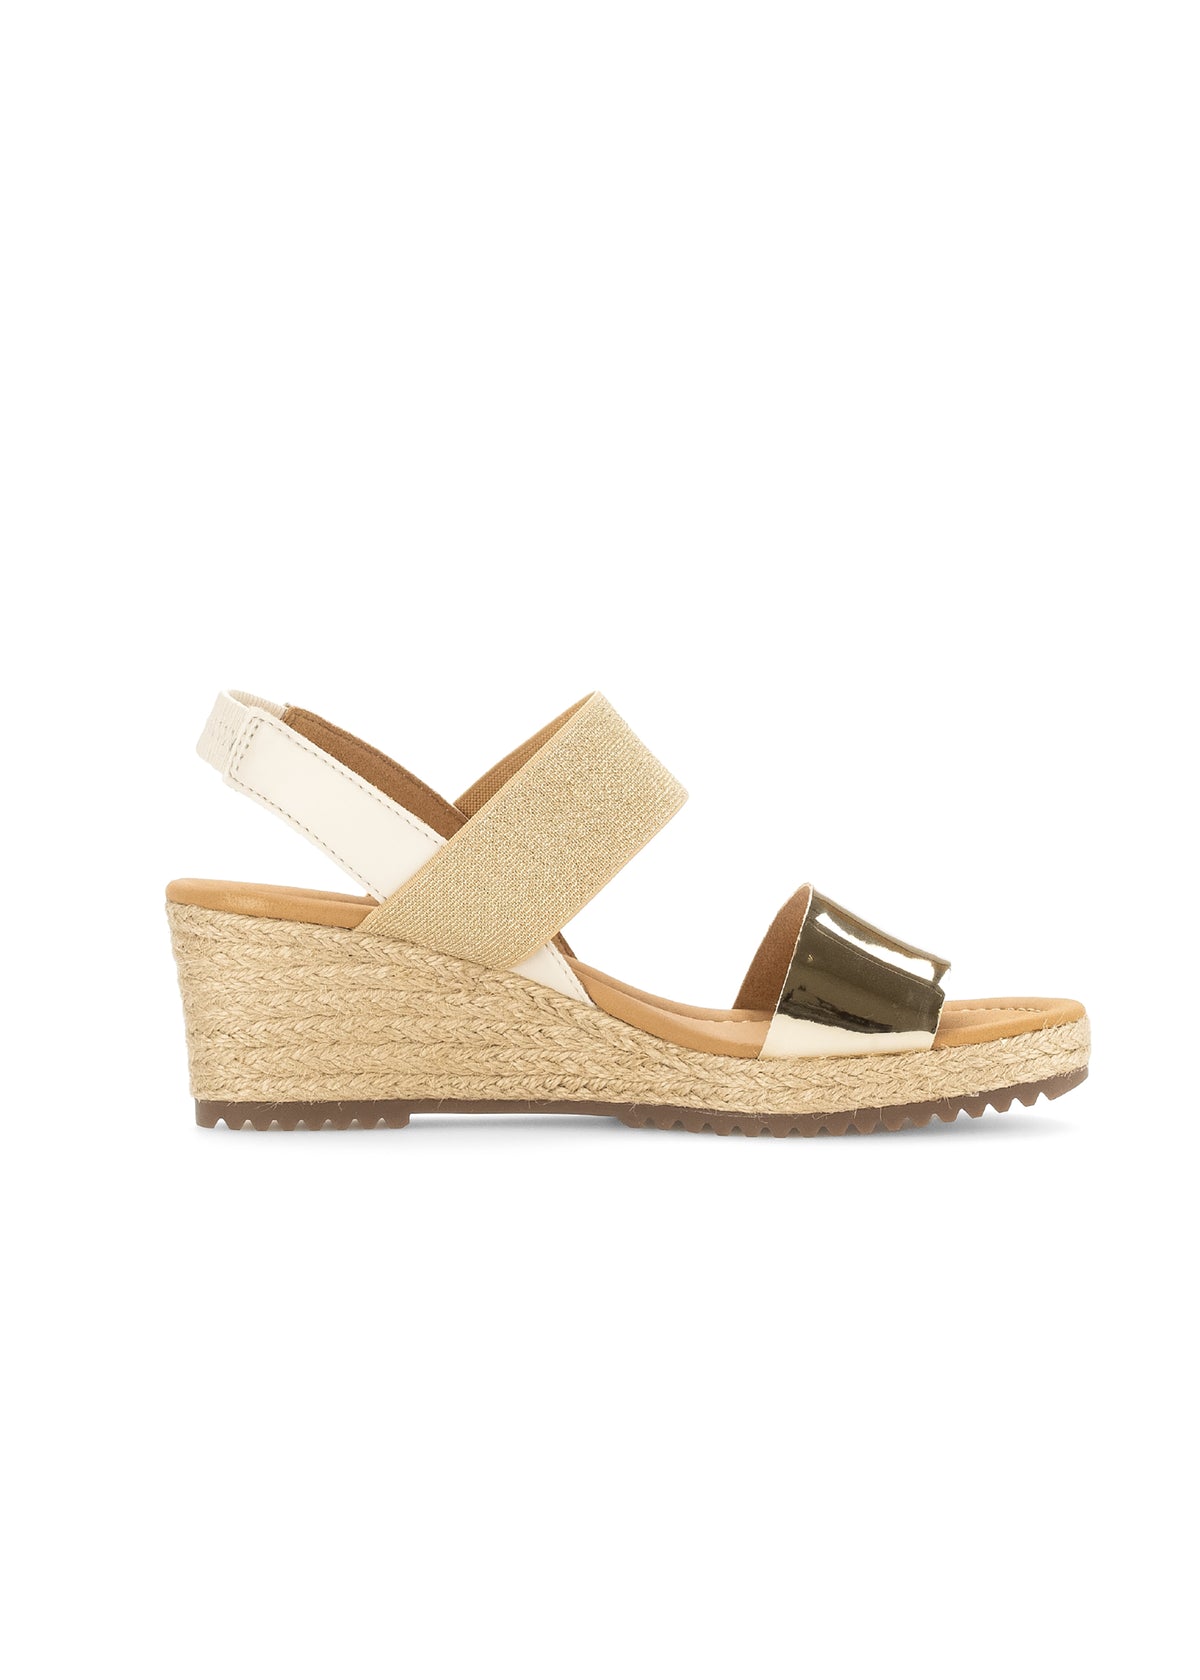 Sandals with a wedge heel - shiny gold and beige tones